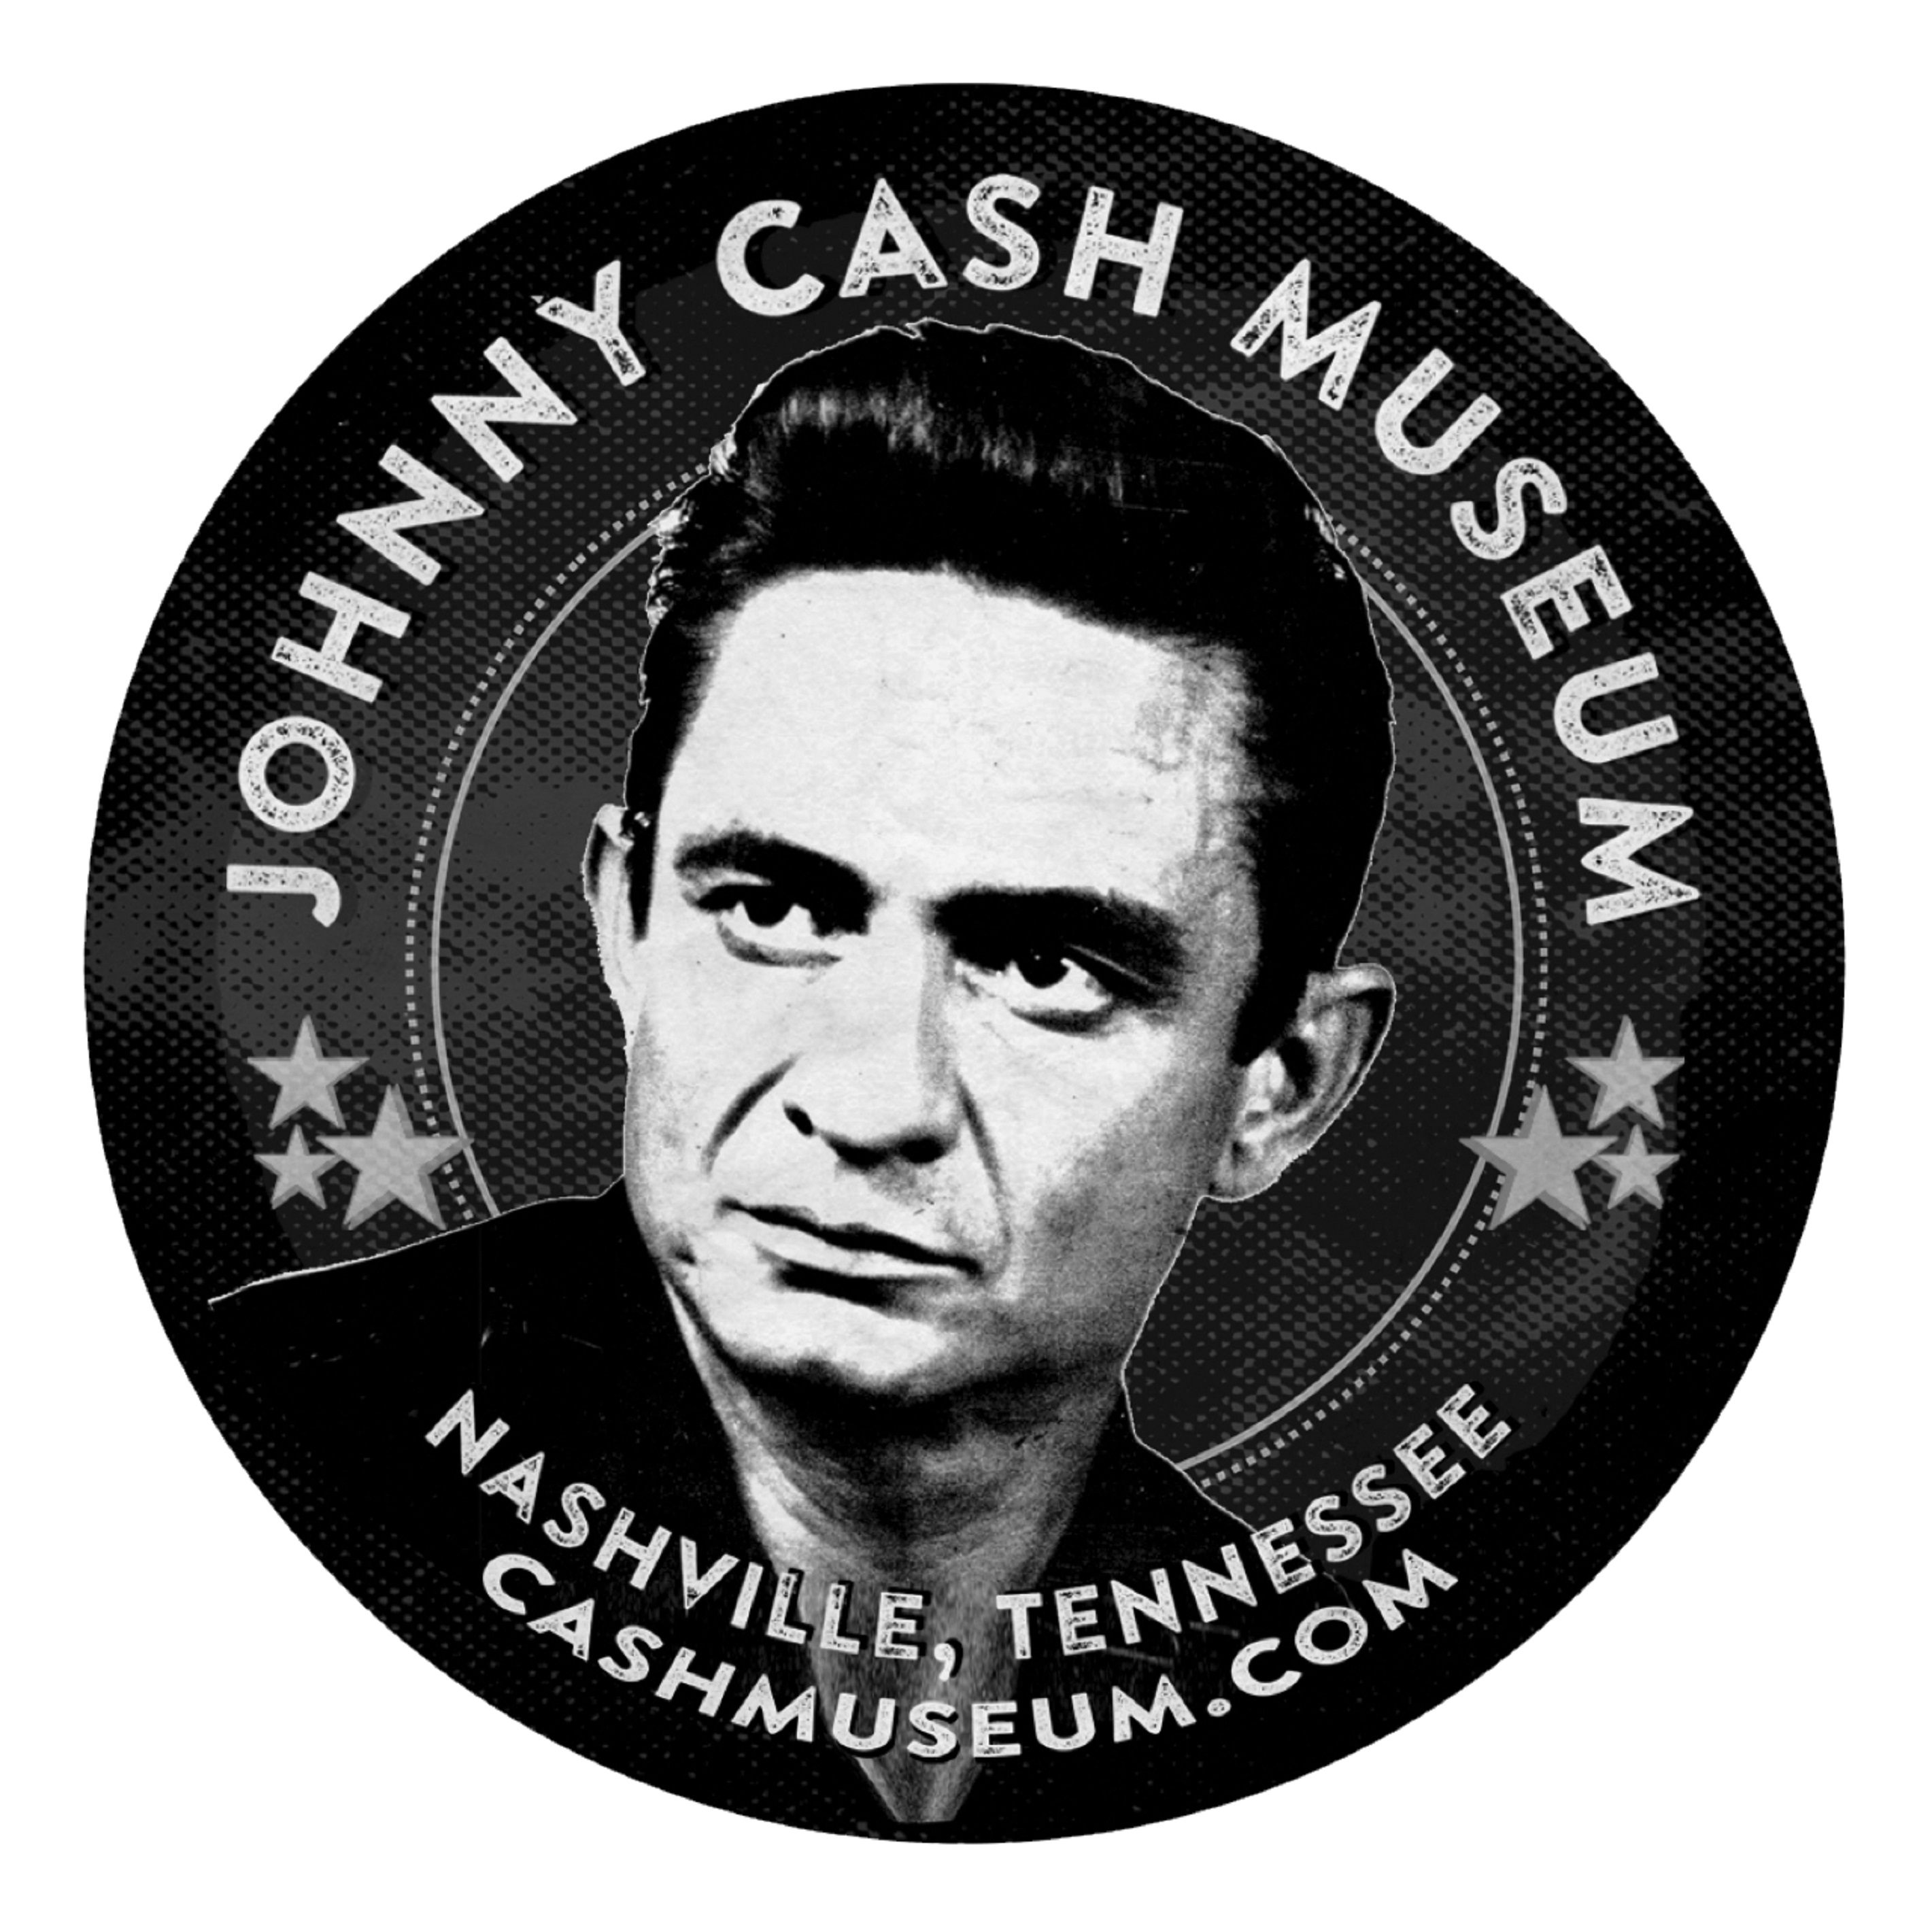 Johnny Cash Museum Named Best Music Museum In 2023 USA Today 10 Best Readers' Choice Travel Awards